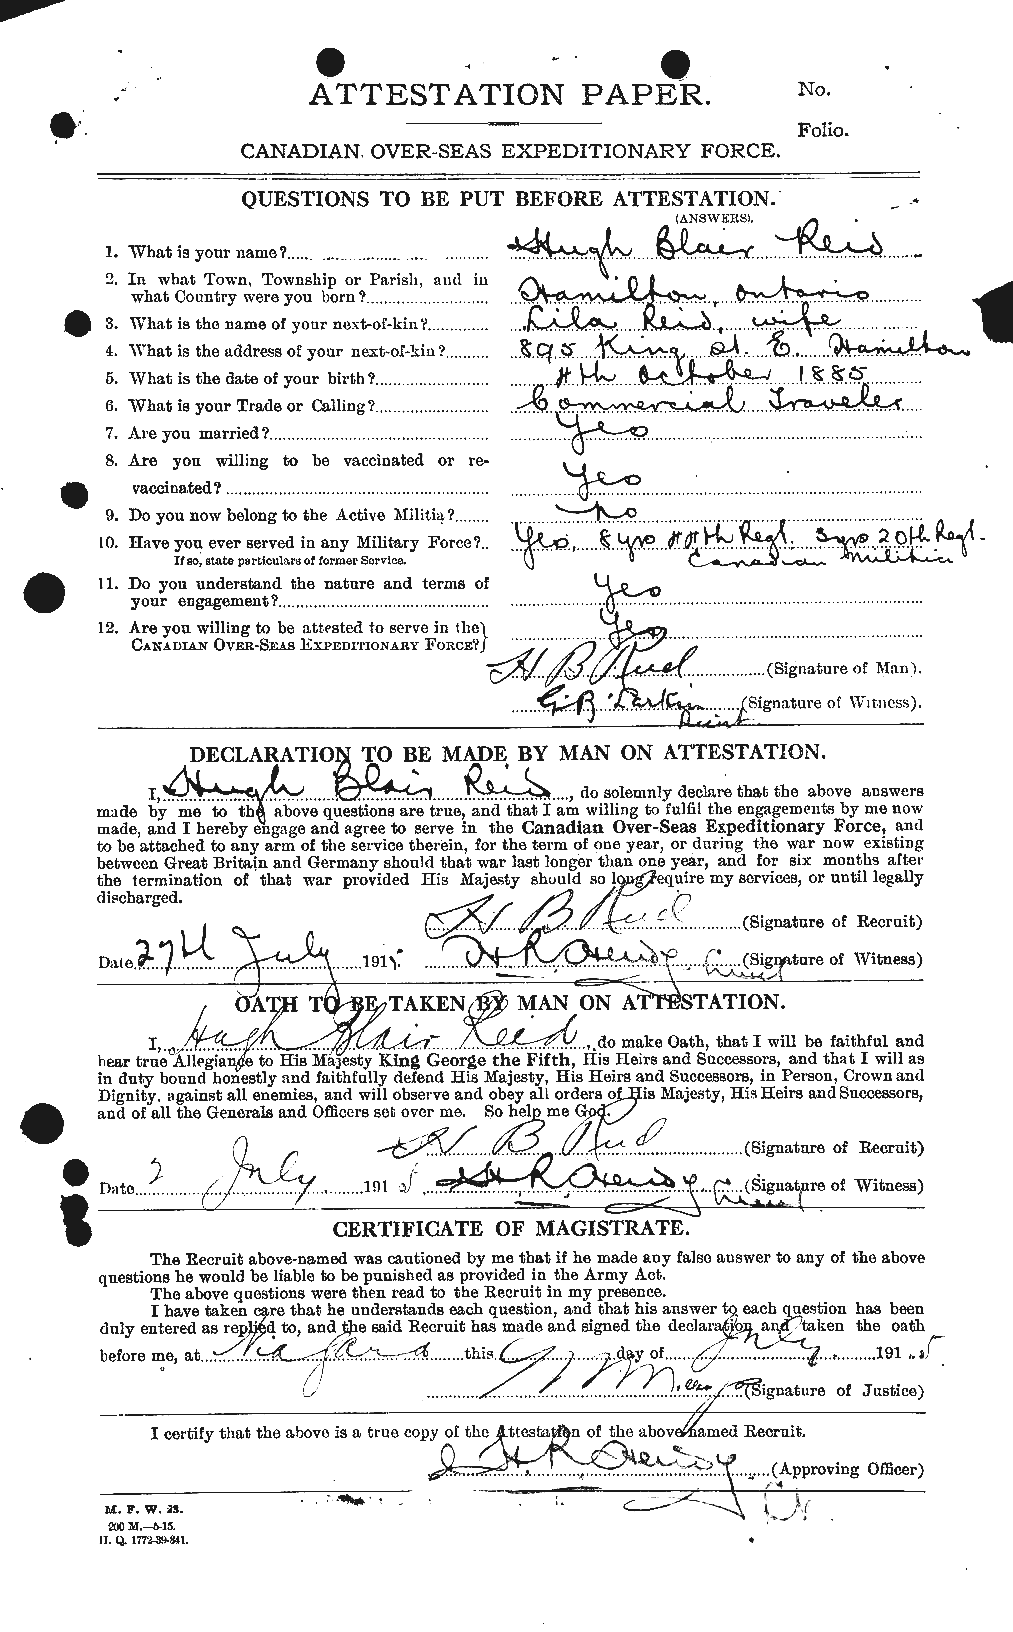 Personnel Records of the First World War - CEF 598626a